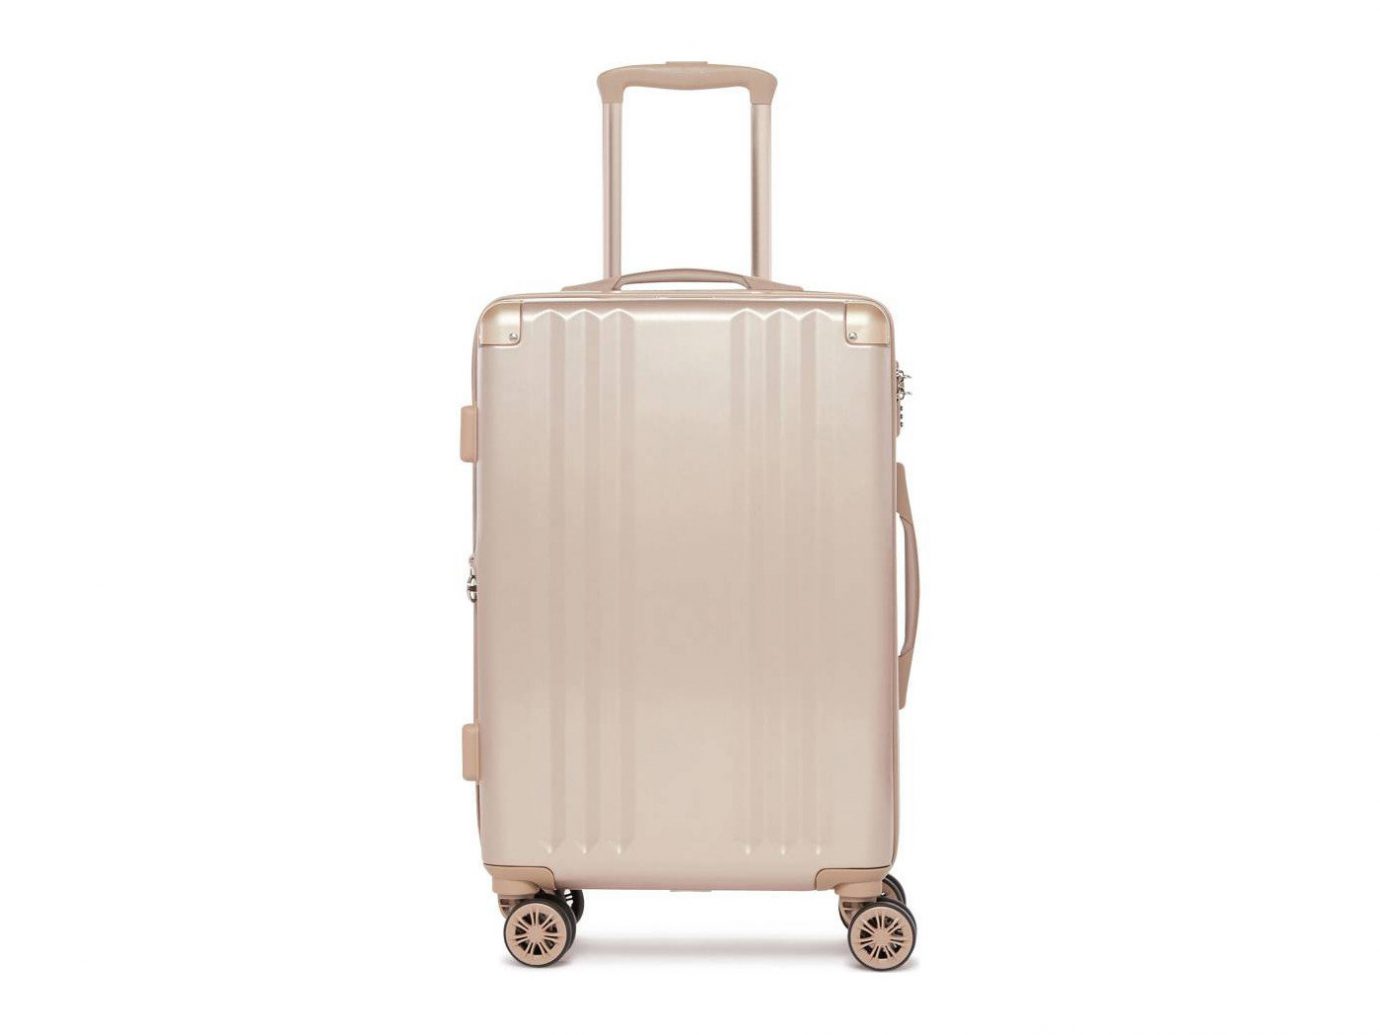 Travel Shop Travel Tech Travel Tips product suitcase beige product design hand luggage appliance luggage & bags